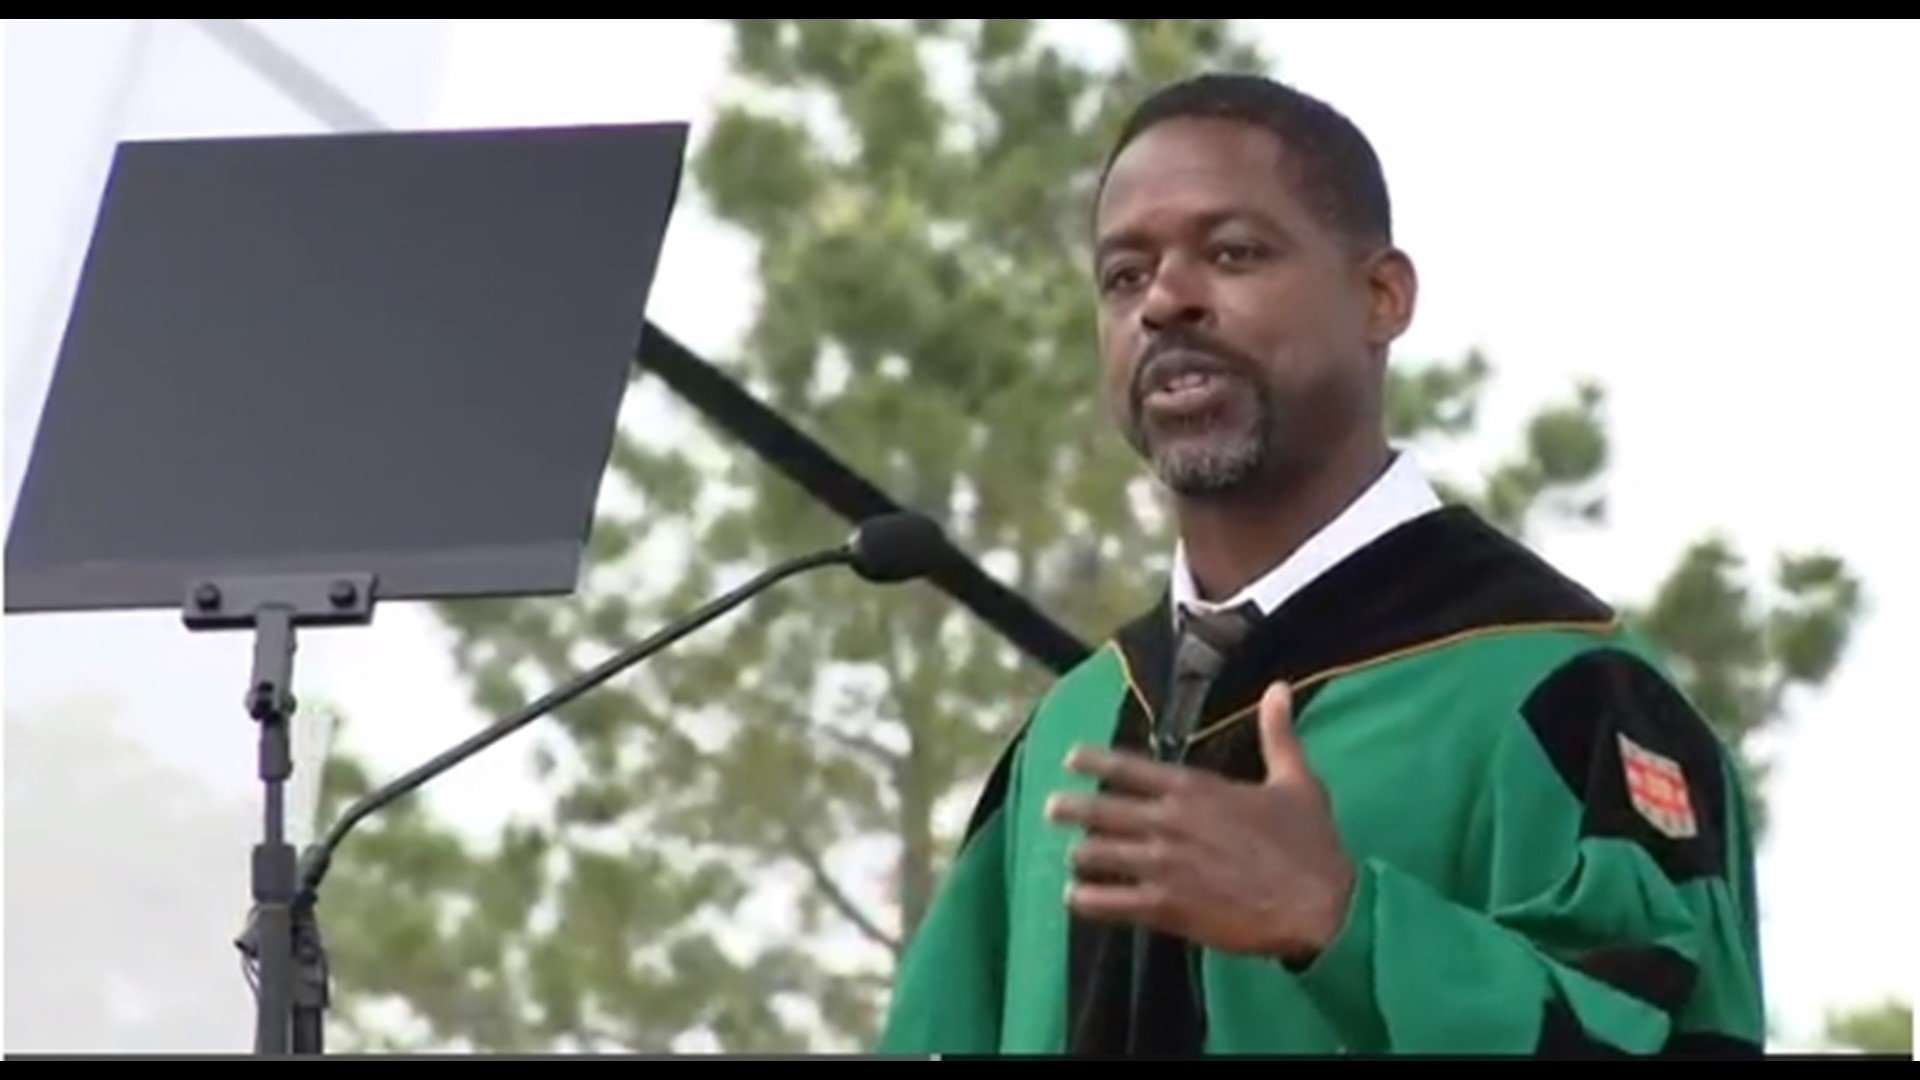 Washington University students received their diplomas today as they walked across the stage. Actor, and St. Louis native Sterling K. Brown gave a speech.